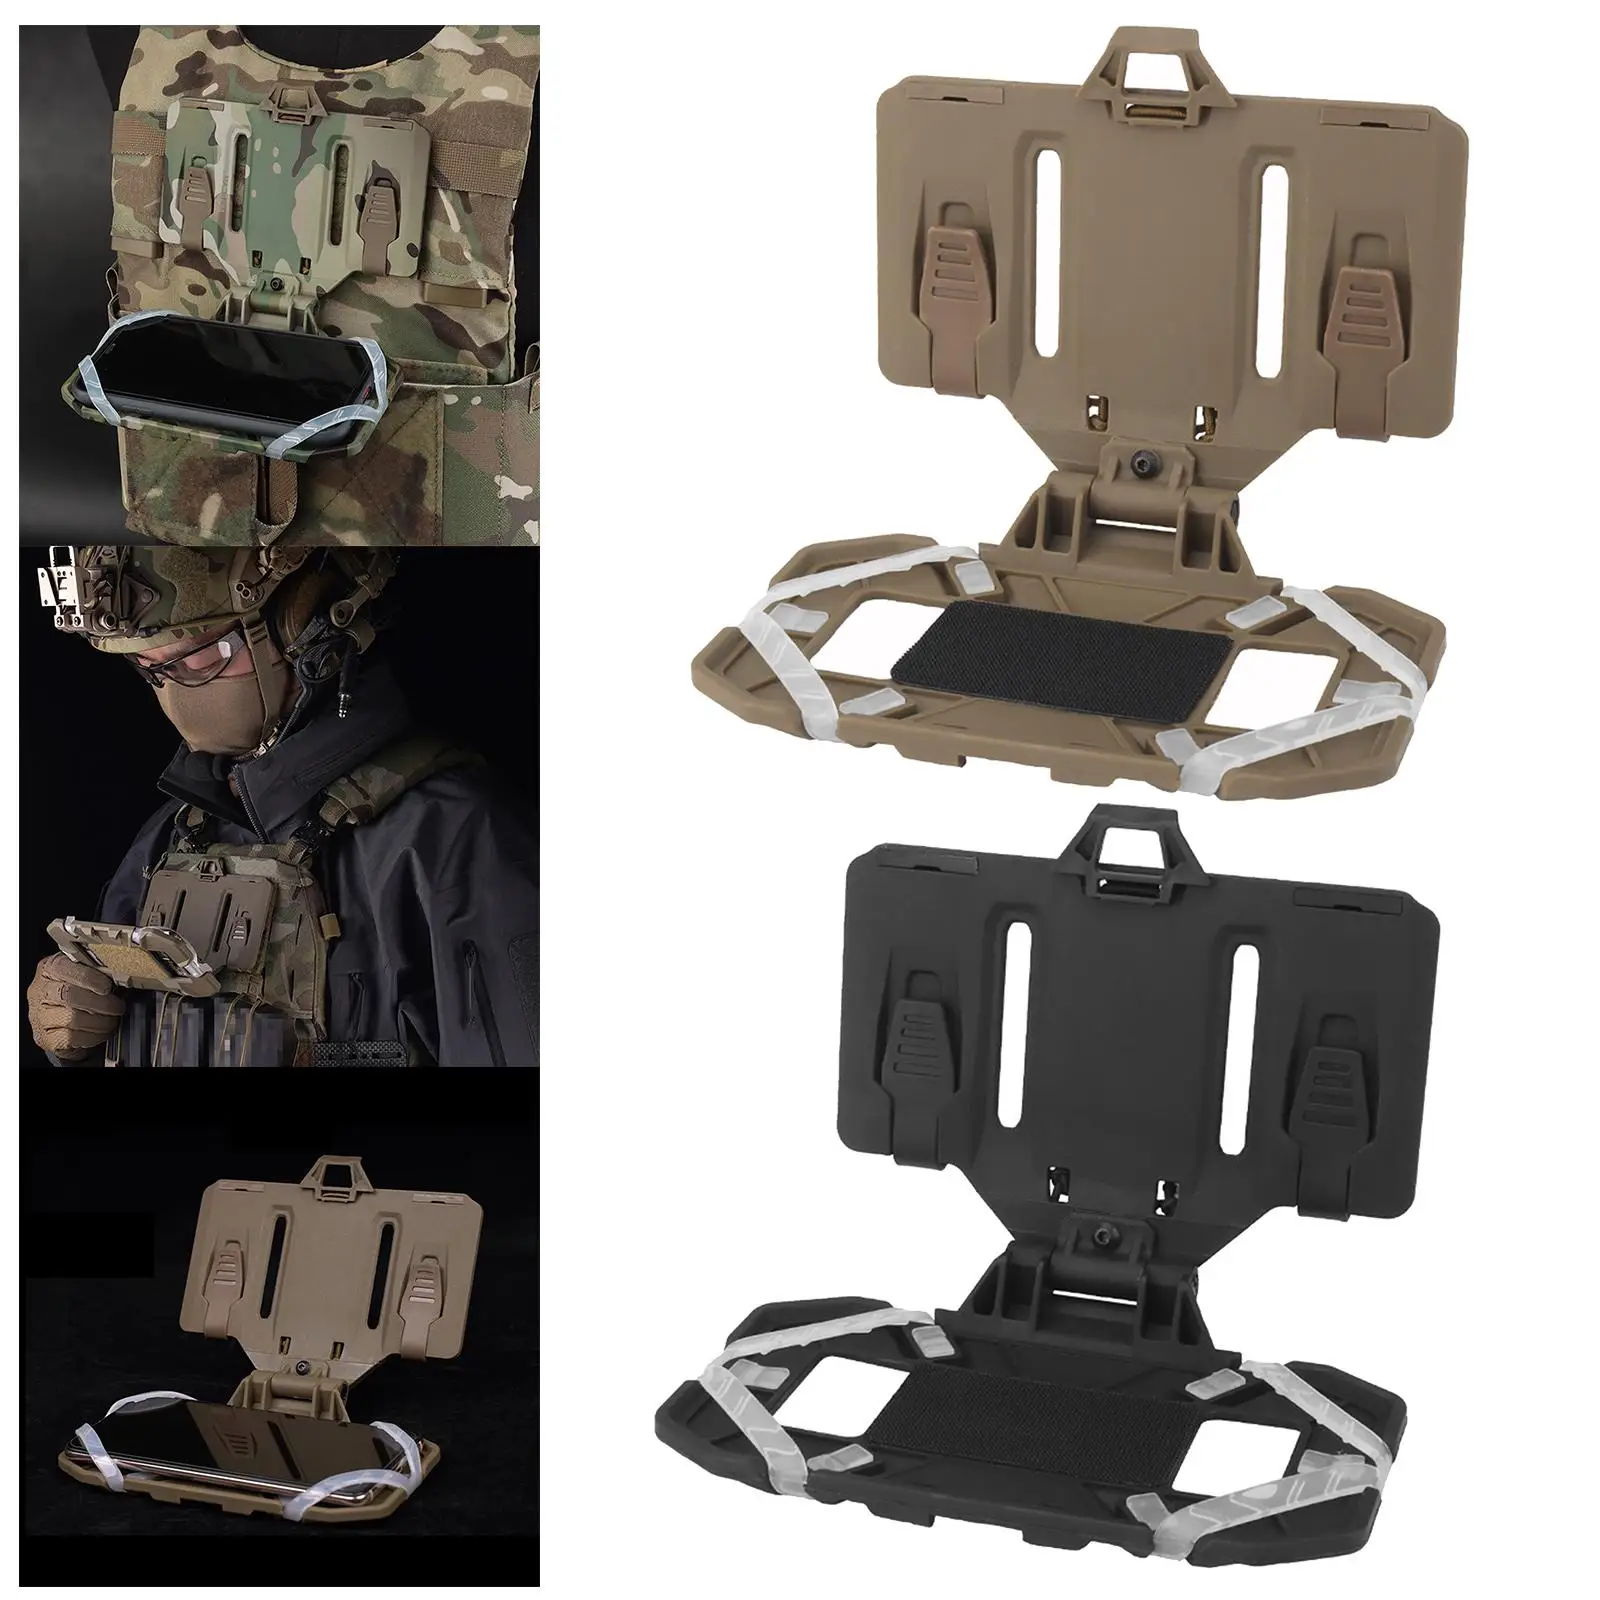 Hunting Vest Phone Board Lightweight Chest Phone Holder Mount Phone Carrier Plate for Most Phones Waist Belts Training